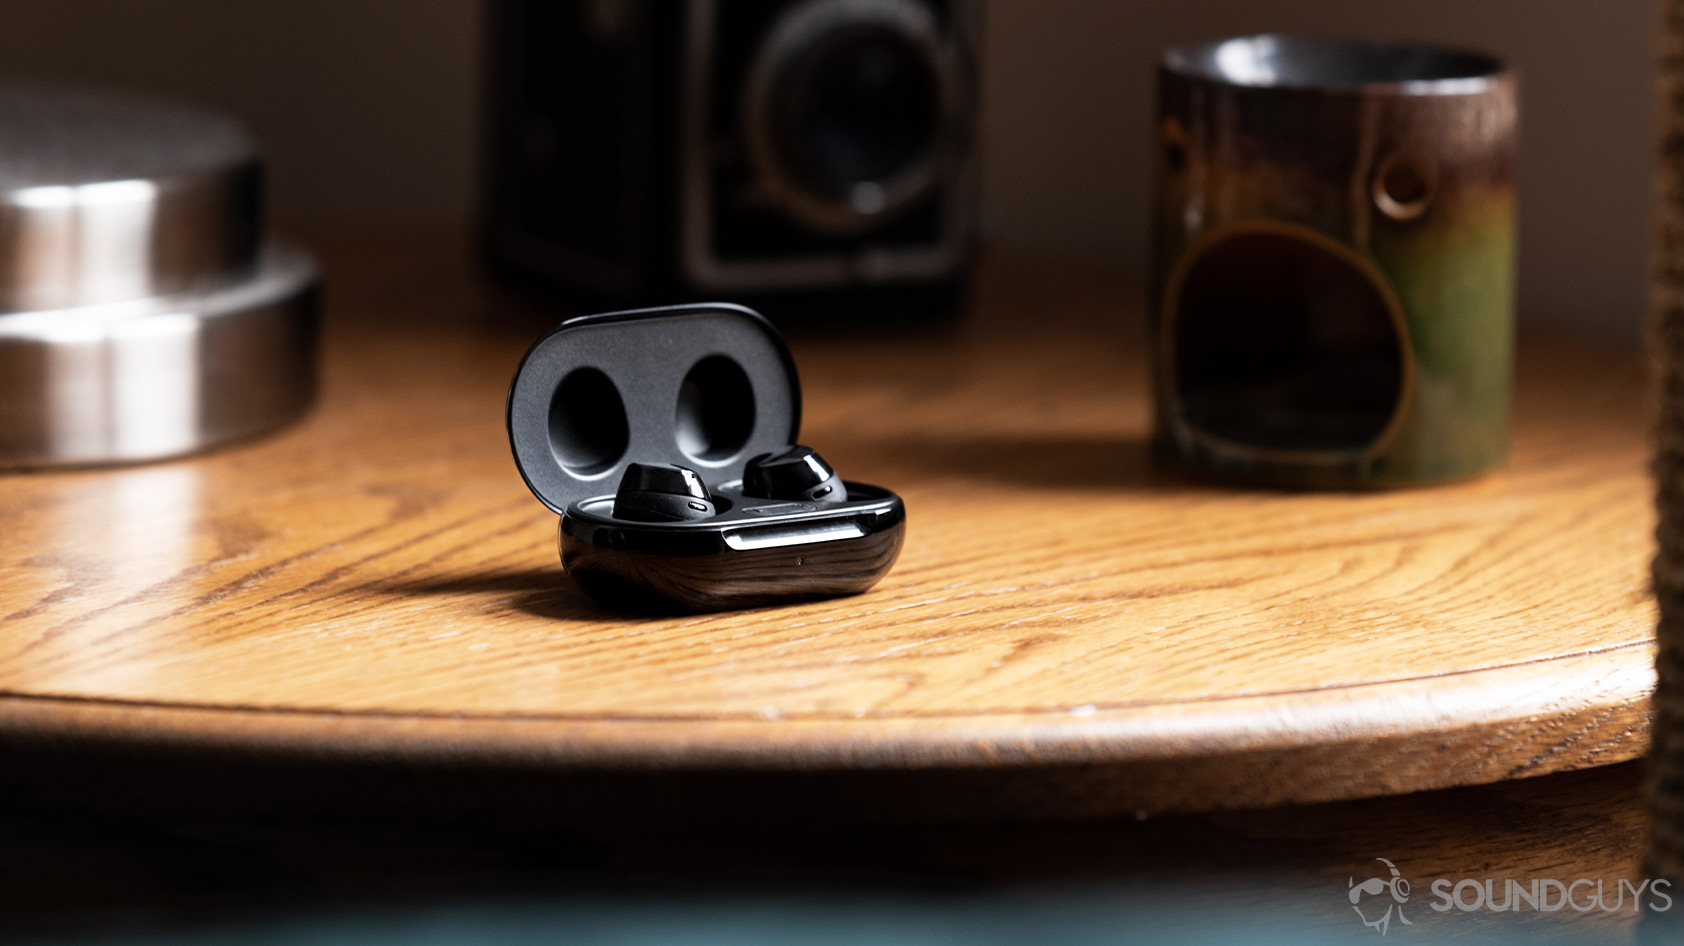 A picture of the Samsung Galaxy Buds Plus true wireless earbuds on a wooden table in front of a vintage camera for the Samsung Galaxy Buds Plus vs Samsung Galaxy Buds Live comparison.